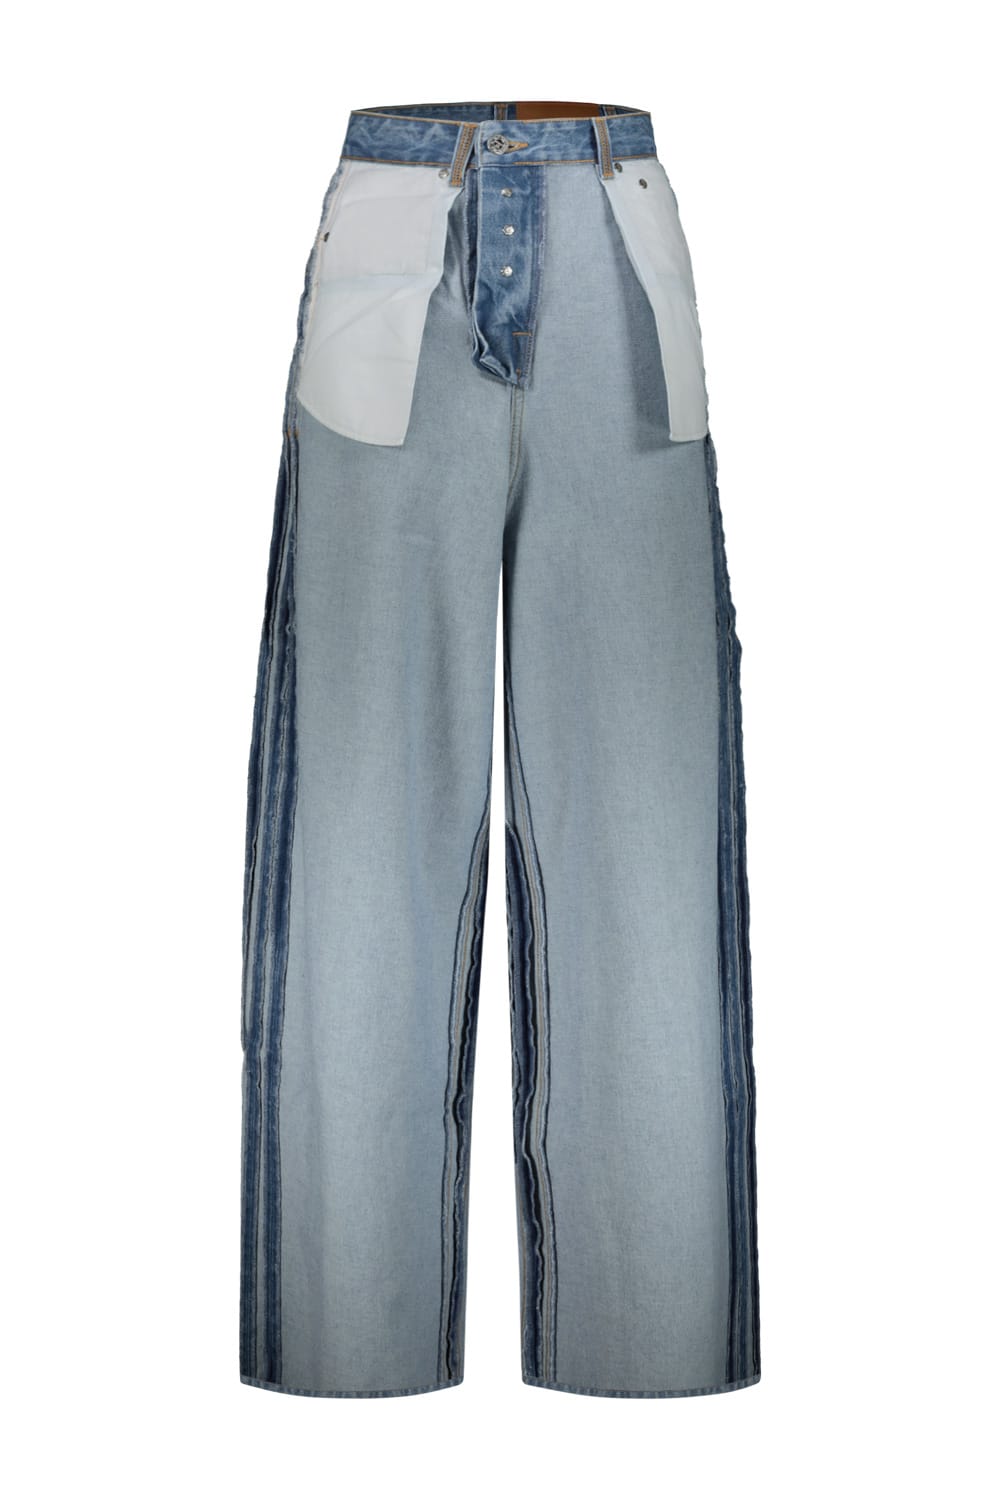 Inside-out Baggy Jeans